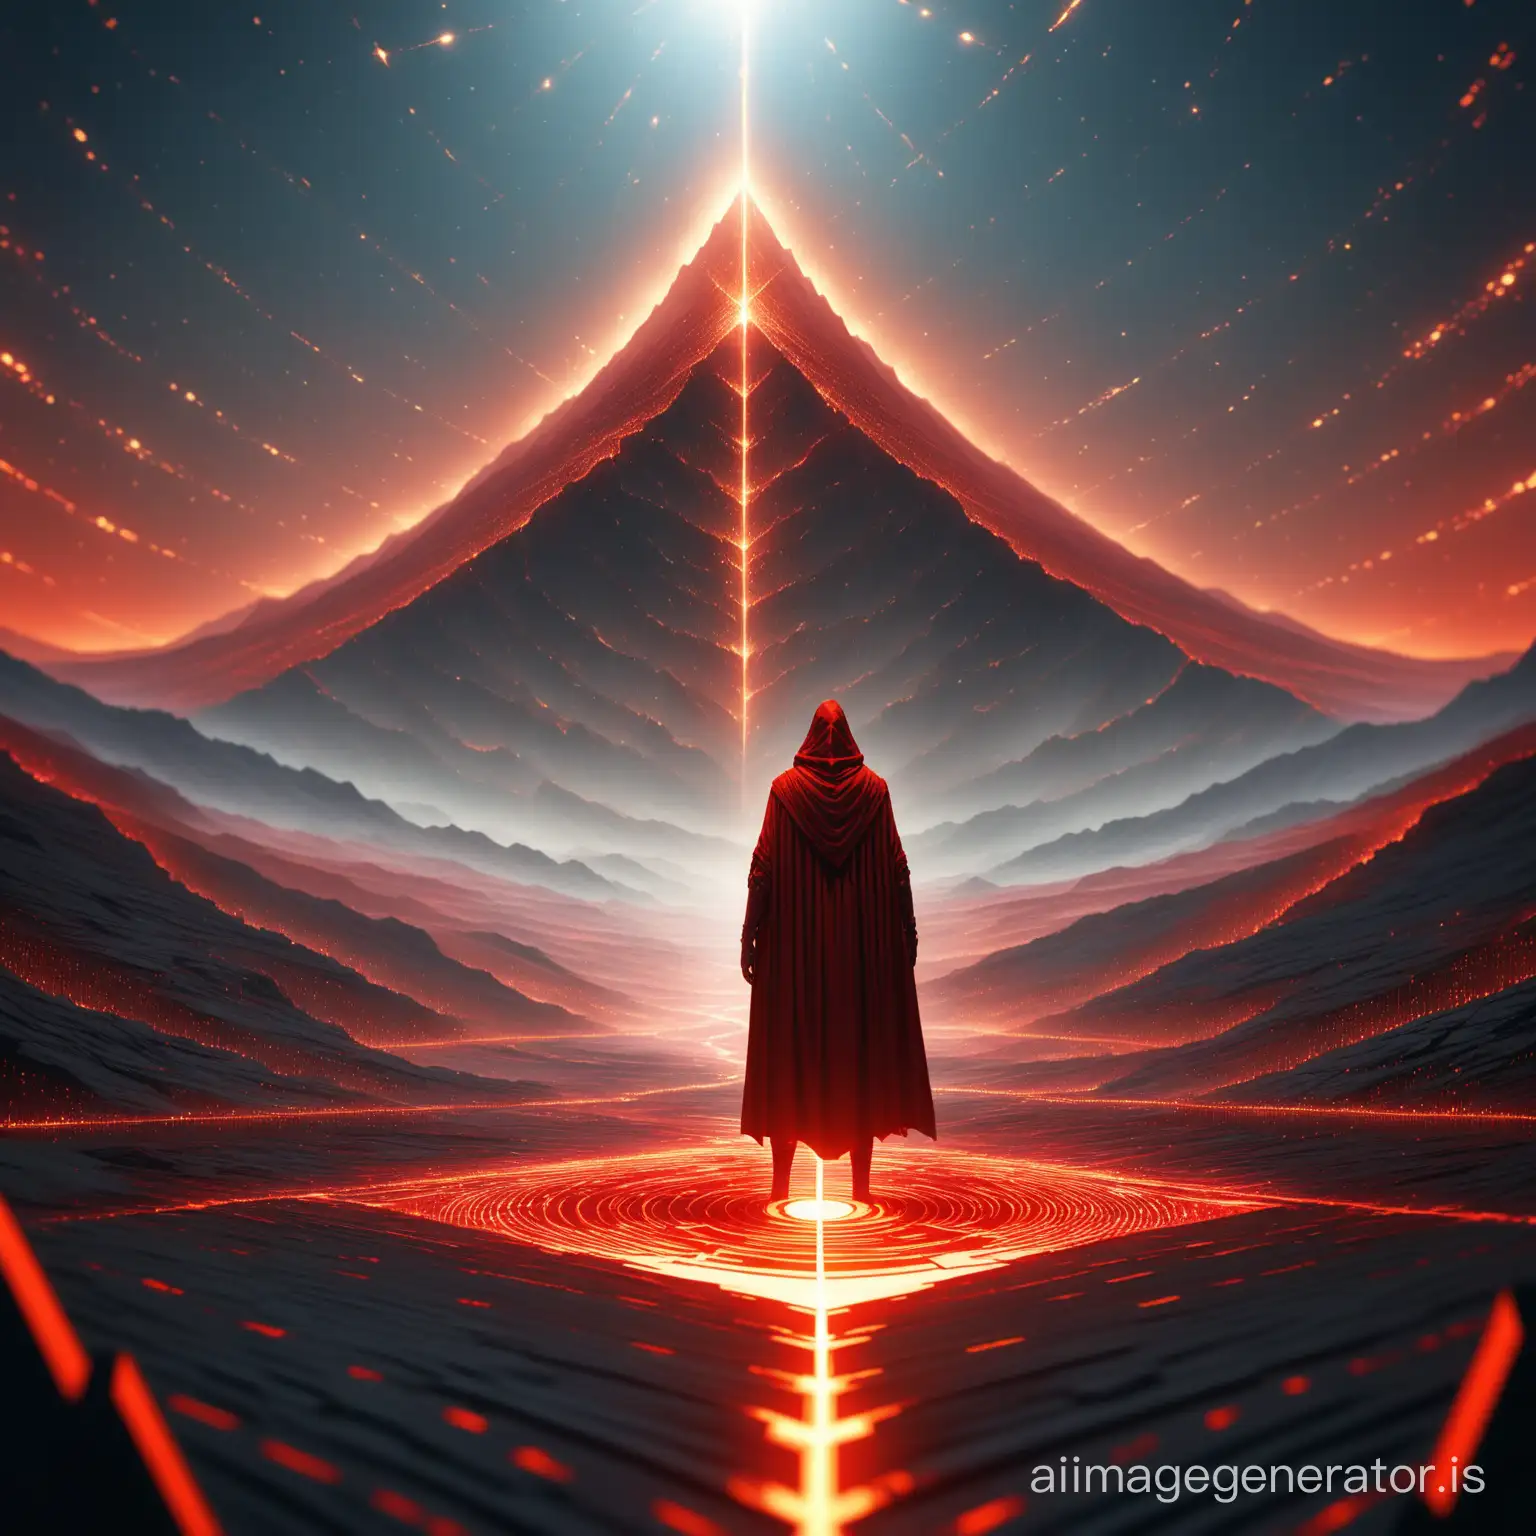 Tall-Beings-in-Red-Cloaks-Against-Golden-Sky-Epic-Engraved-Fantasy-Portrait